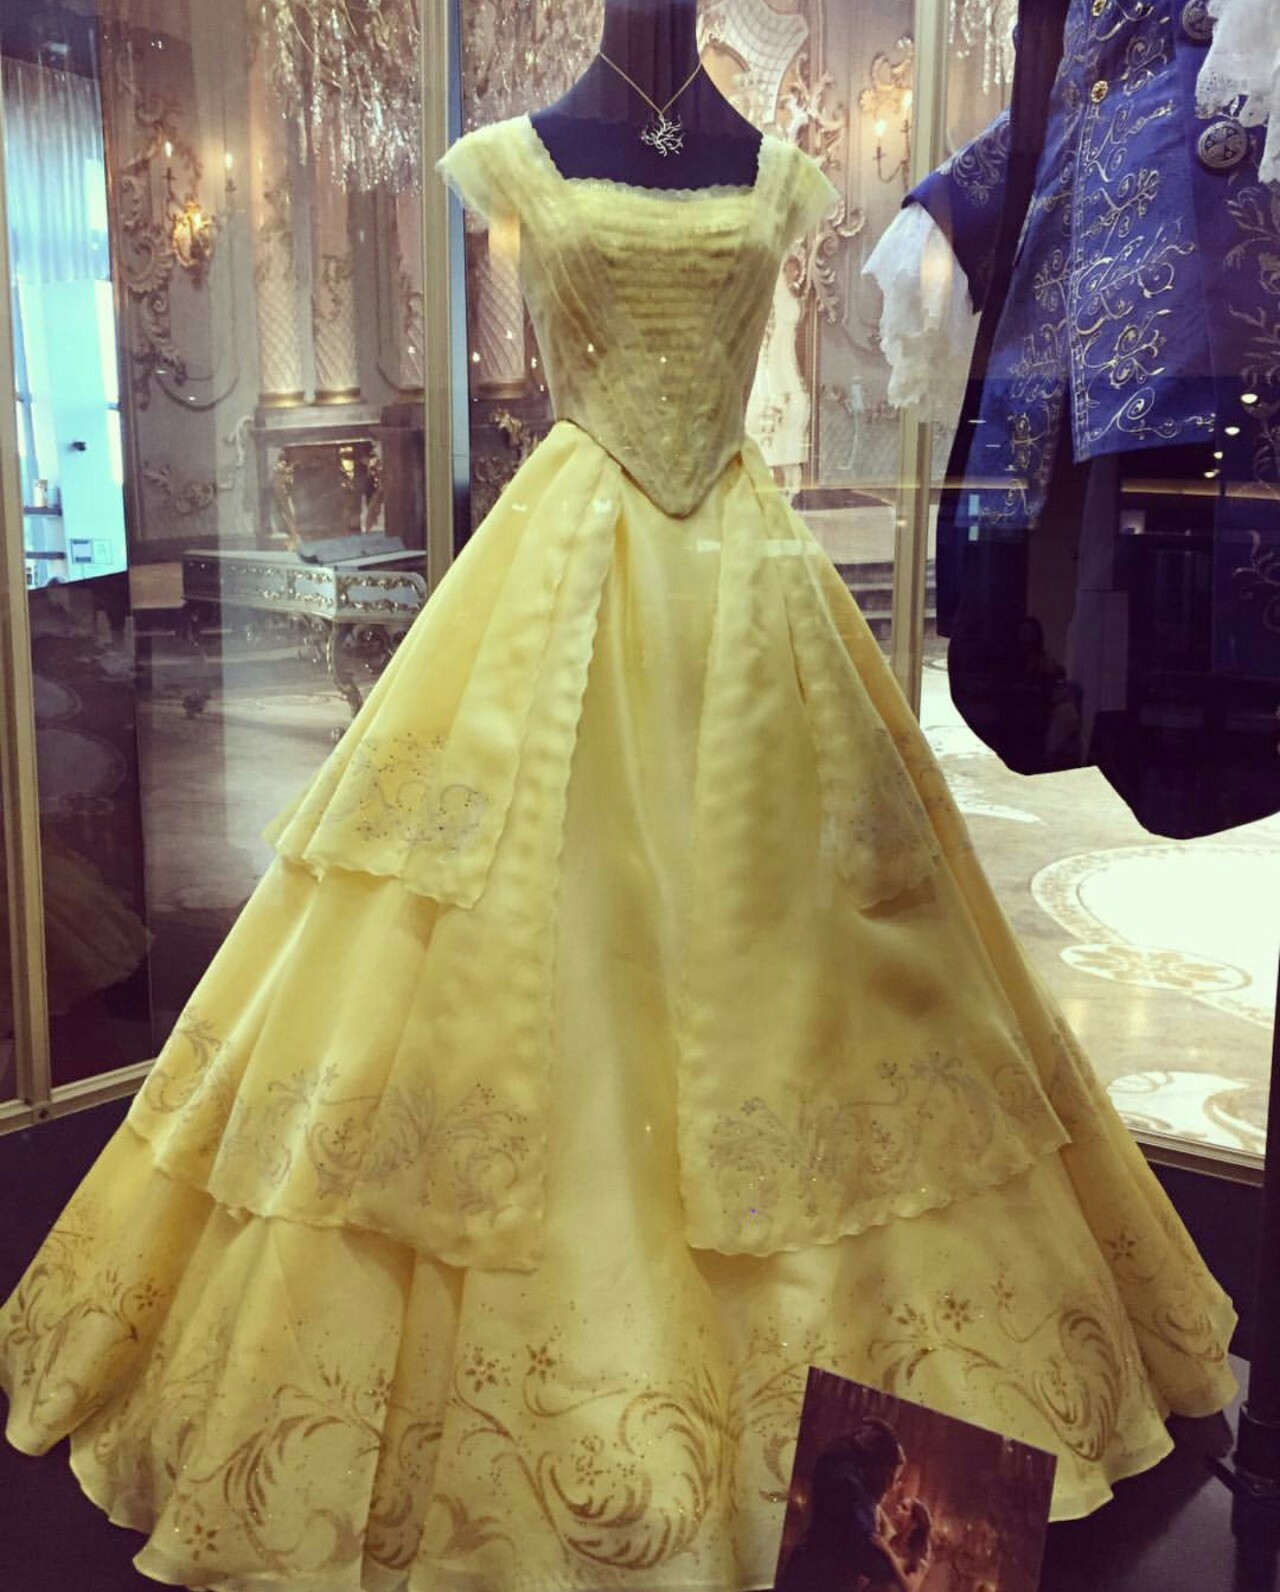 Favorite Belle's Yellow Dress (design only, not who's wearing it ...